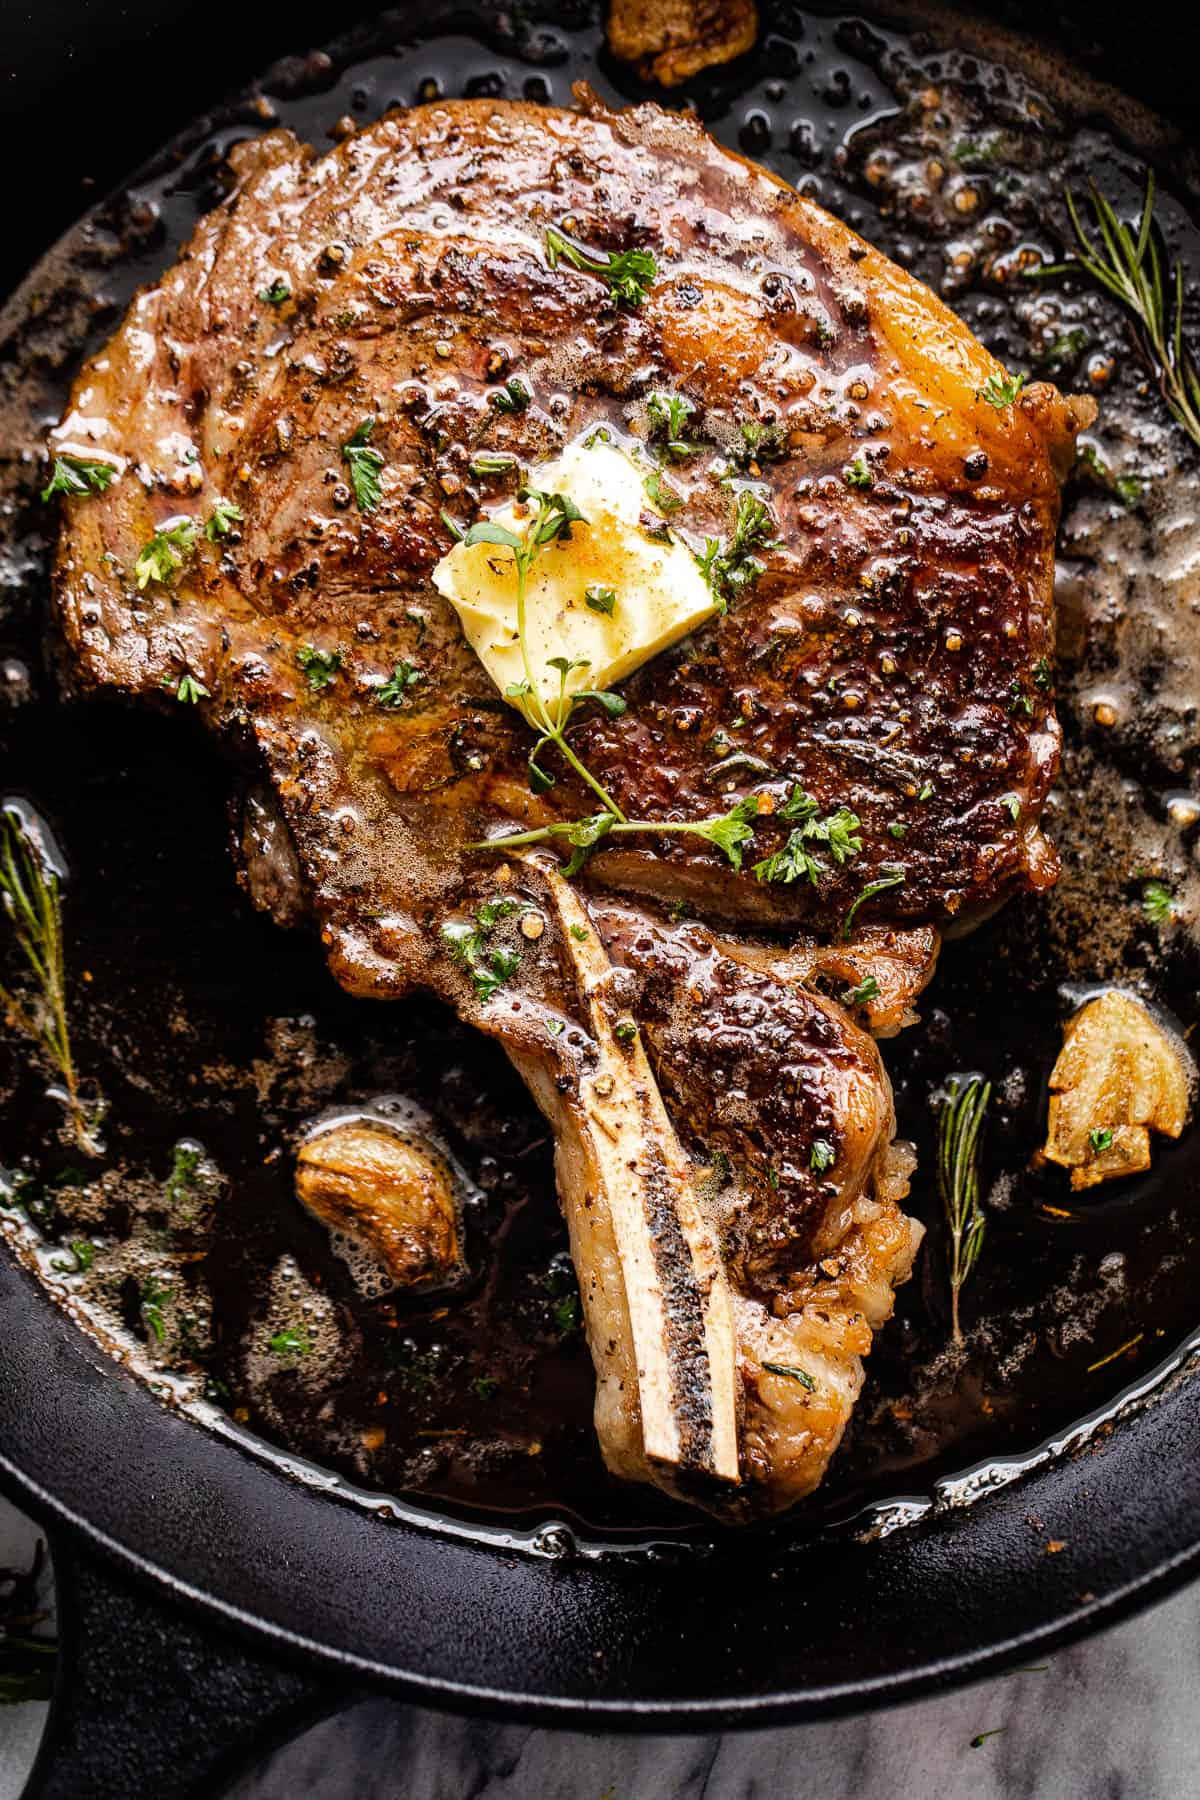 A Steak In A Skillet With Butter And Herbs